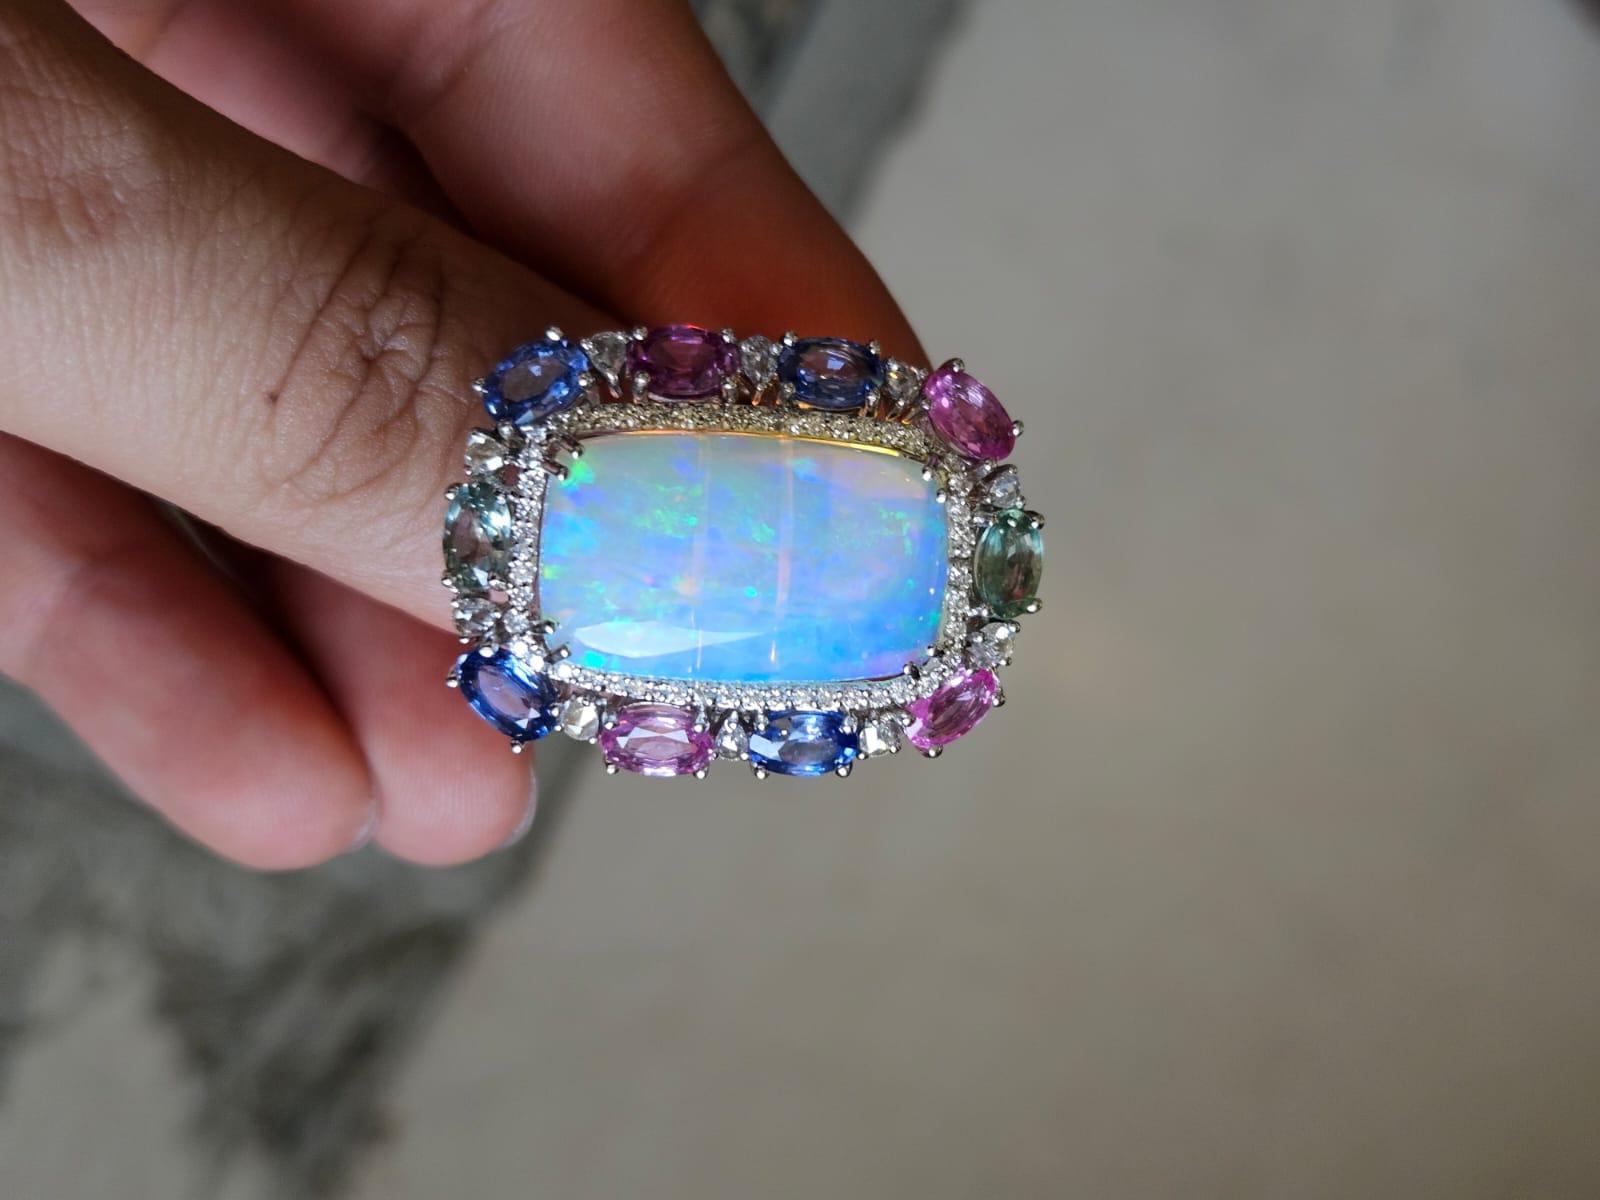 A very gorgeous and beautiful, Ethiopian Opal & Multi Sapphires Cocktail Ring set in 18K White Gold & Diamonds. The weight of the Ethiopian Opal is 8.92 carats. The Opal has a green - blue play of colour. The weight of the Multi Sapphires is 5.78